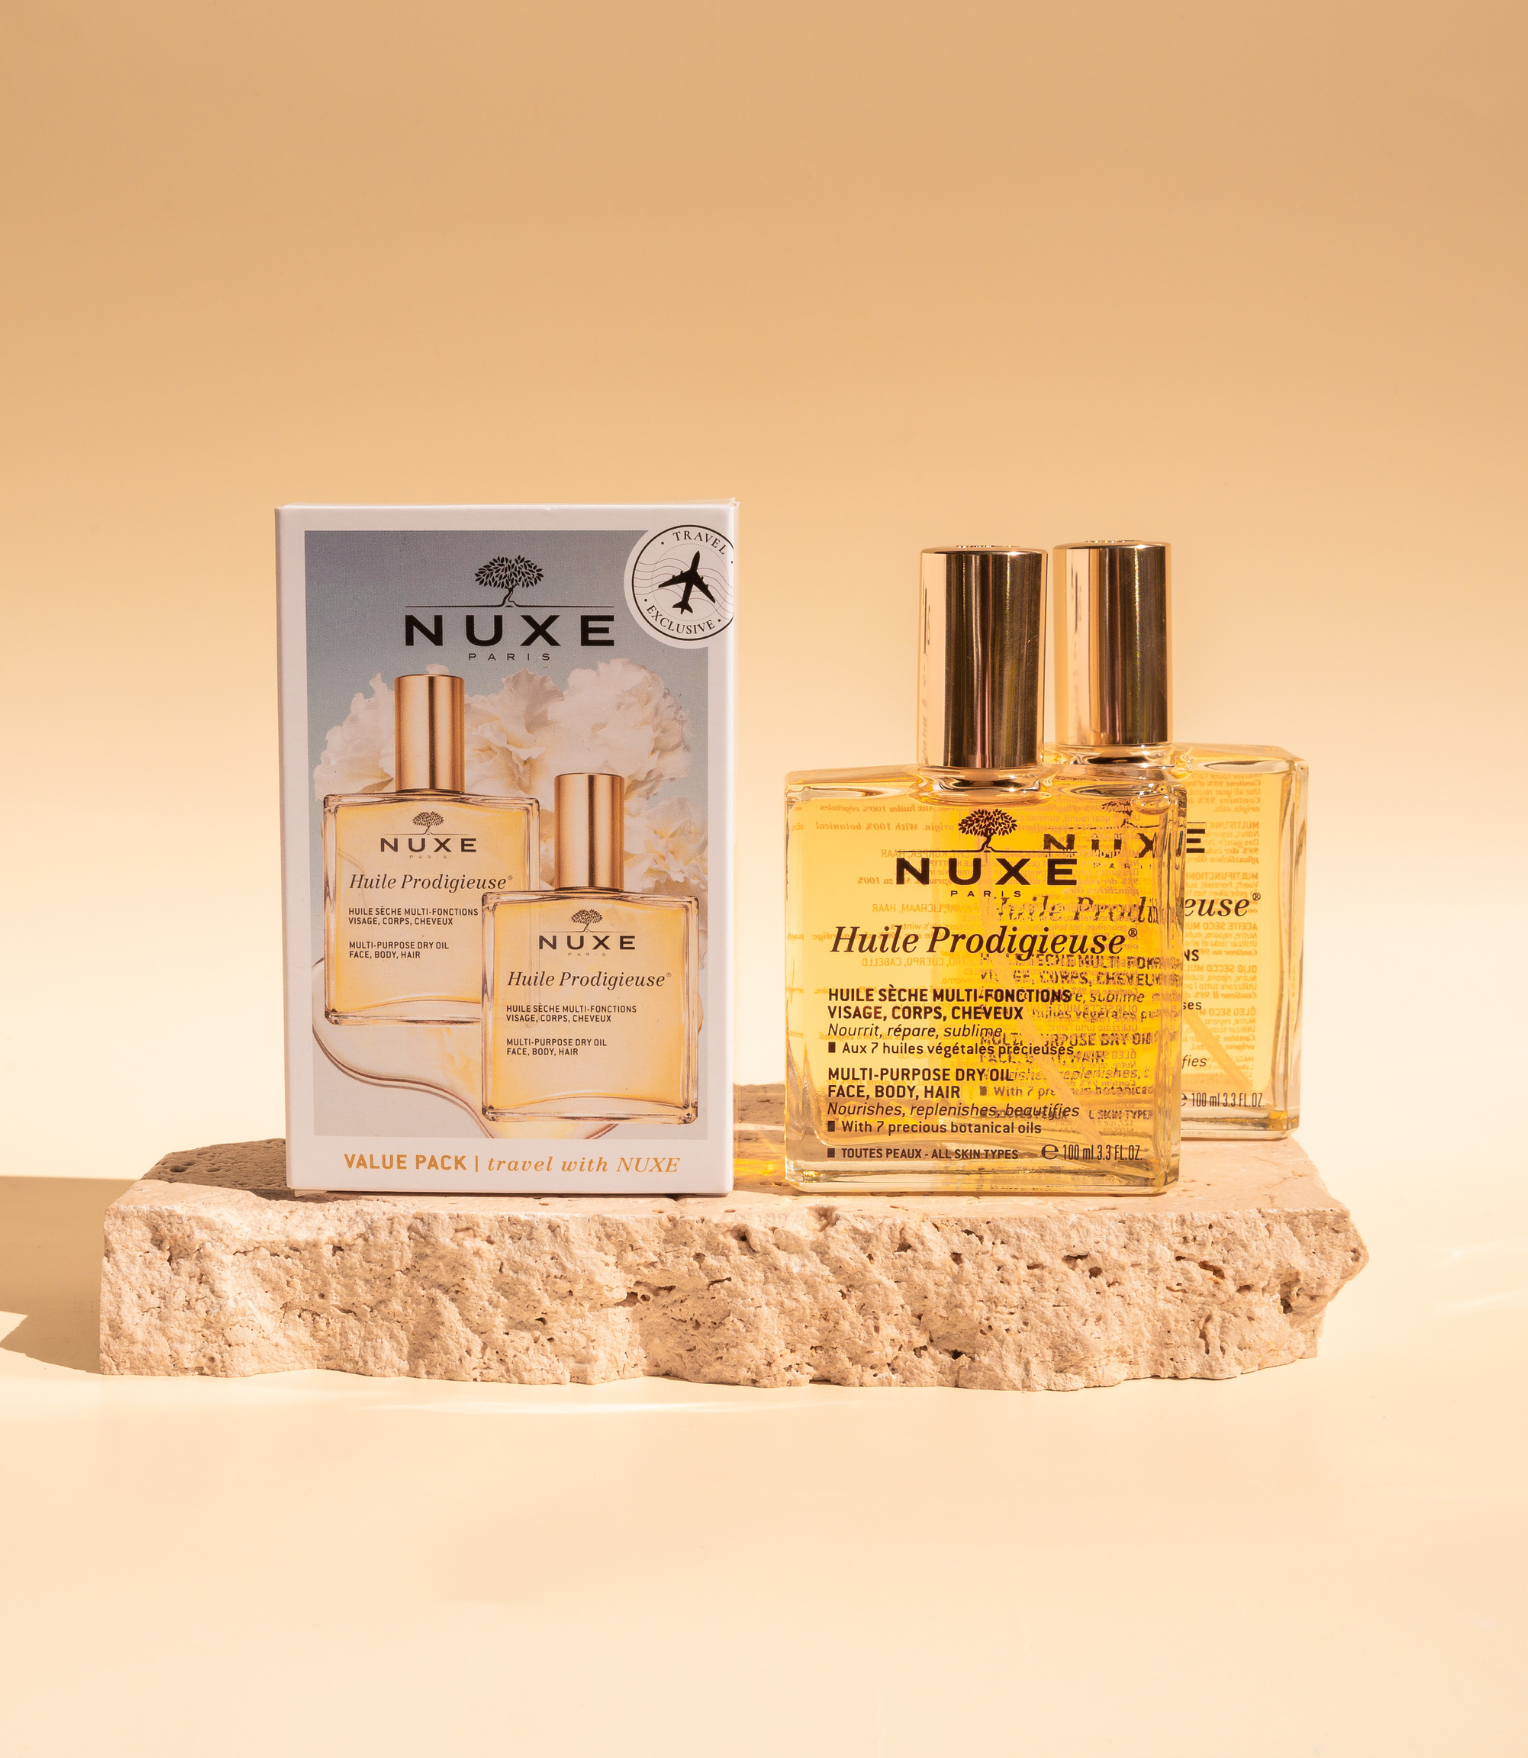 Nuxe Huile Prodigieuse Air Limited Edition 2x100ml